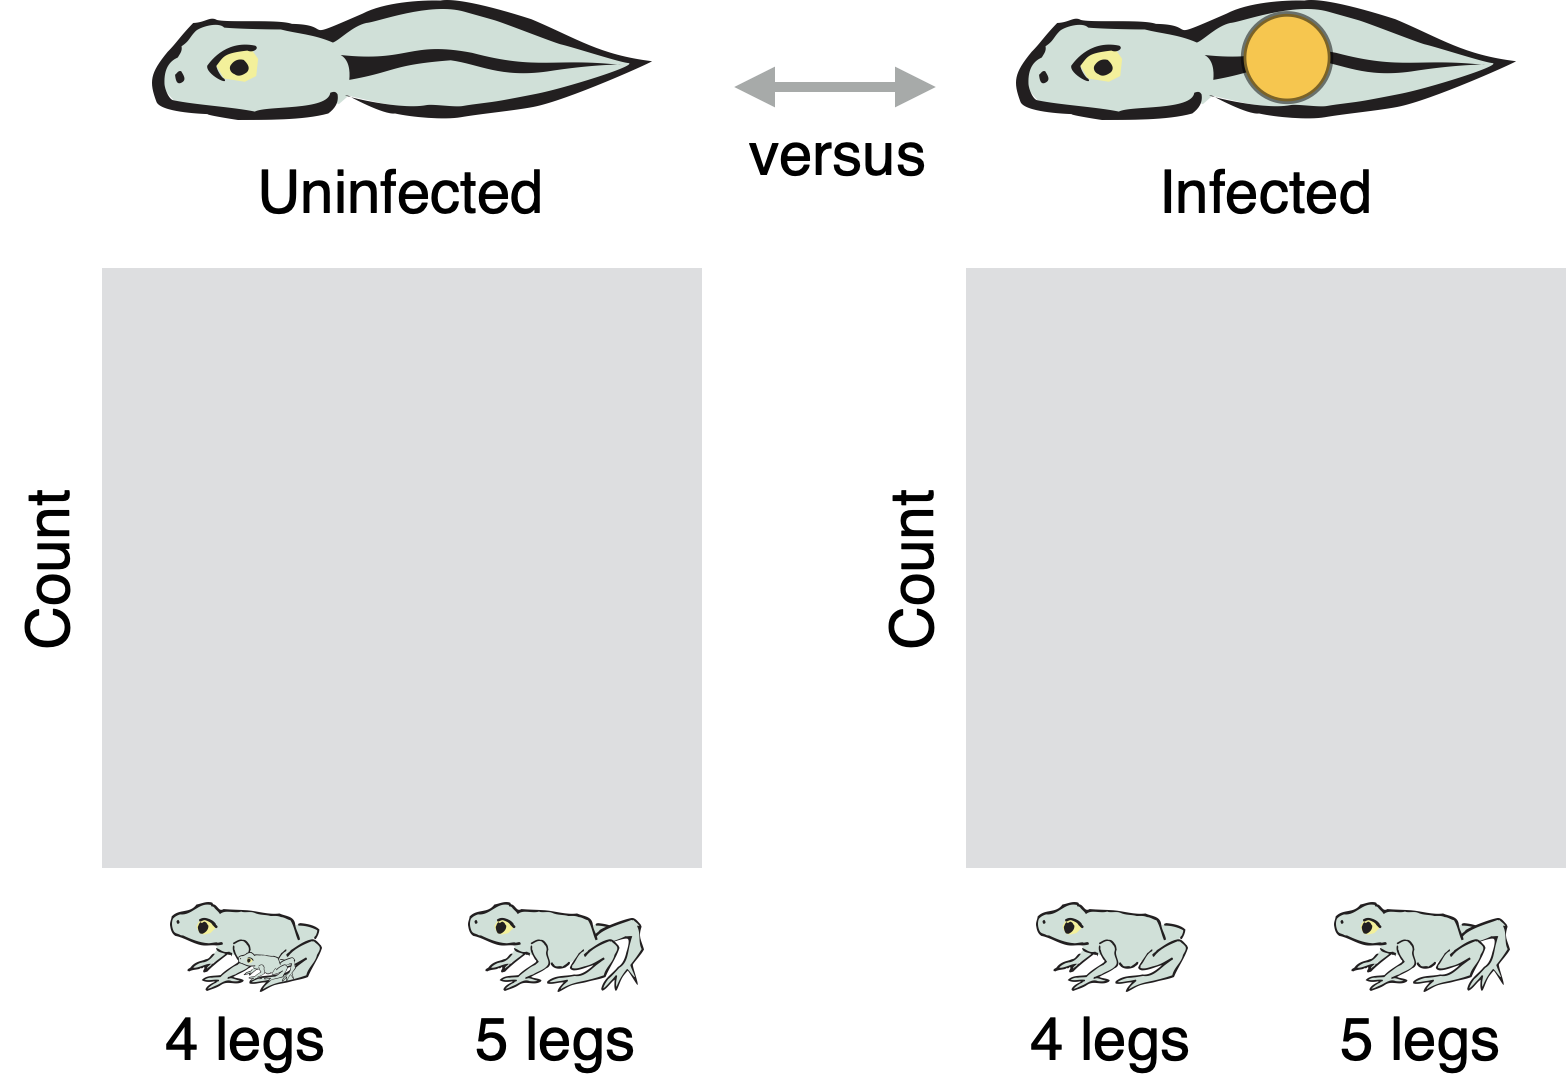 Diagram showing the setup for a pair of side-by-side graphs. The first graph is labeled Unifected, with an illustration of an uninfected tadpole. The second graph is labeled Infected, with an illustration of an infected tadpole. A double headed-arrow labeled versus sits between the illustrations. In both graphs, the vertical axis is Count and the horizontal axis has categories 4 legs and 5 legs, each illustrated with a cartoon frog.